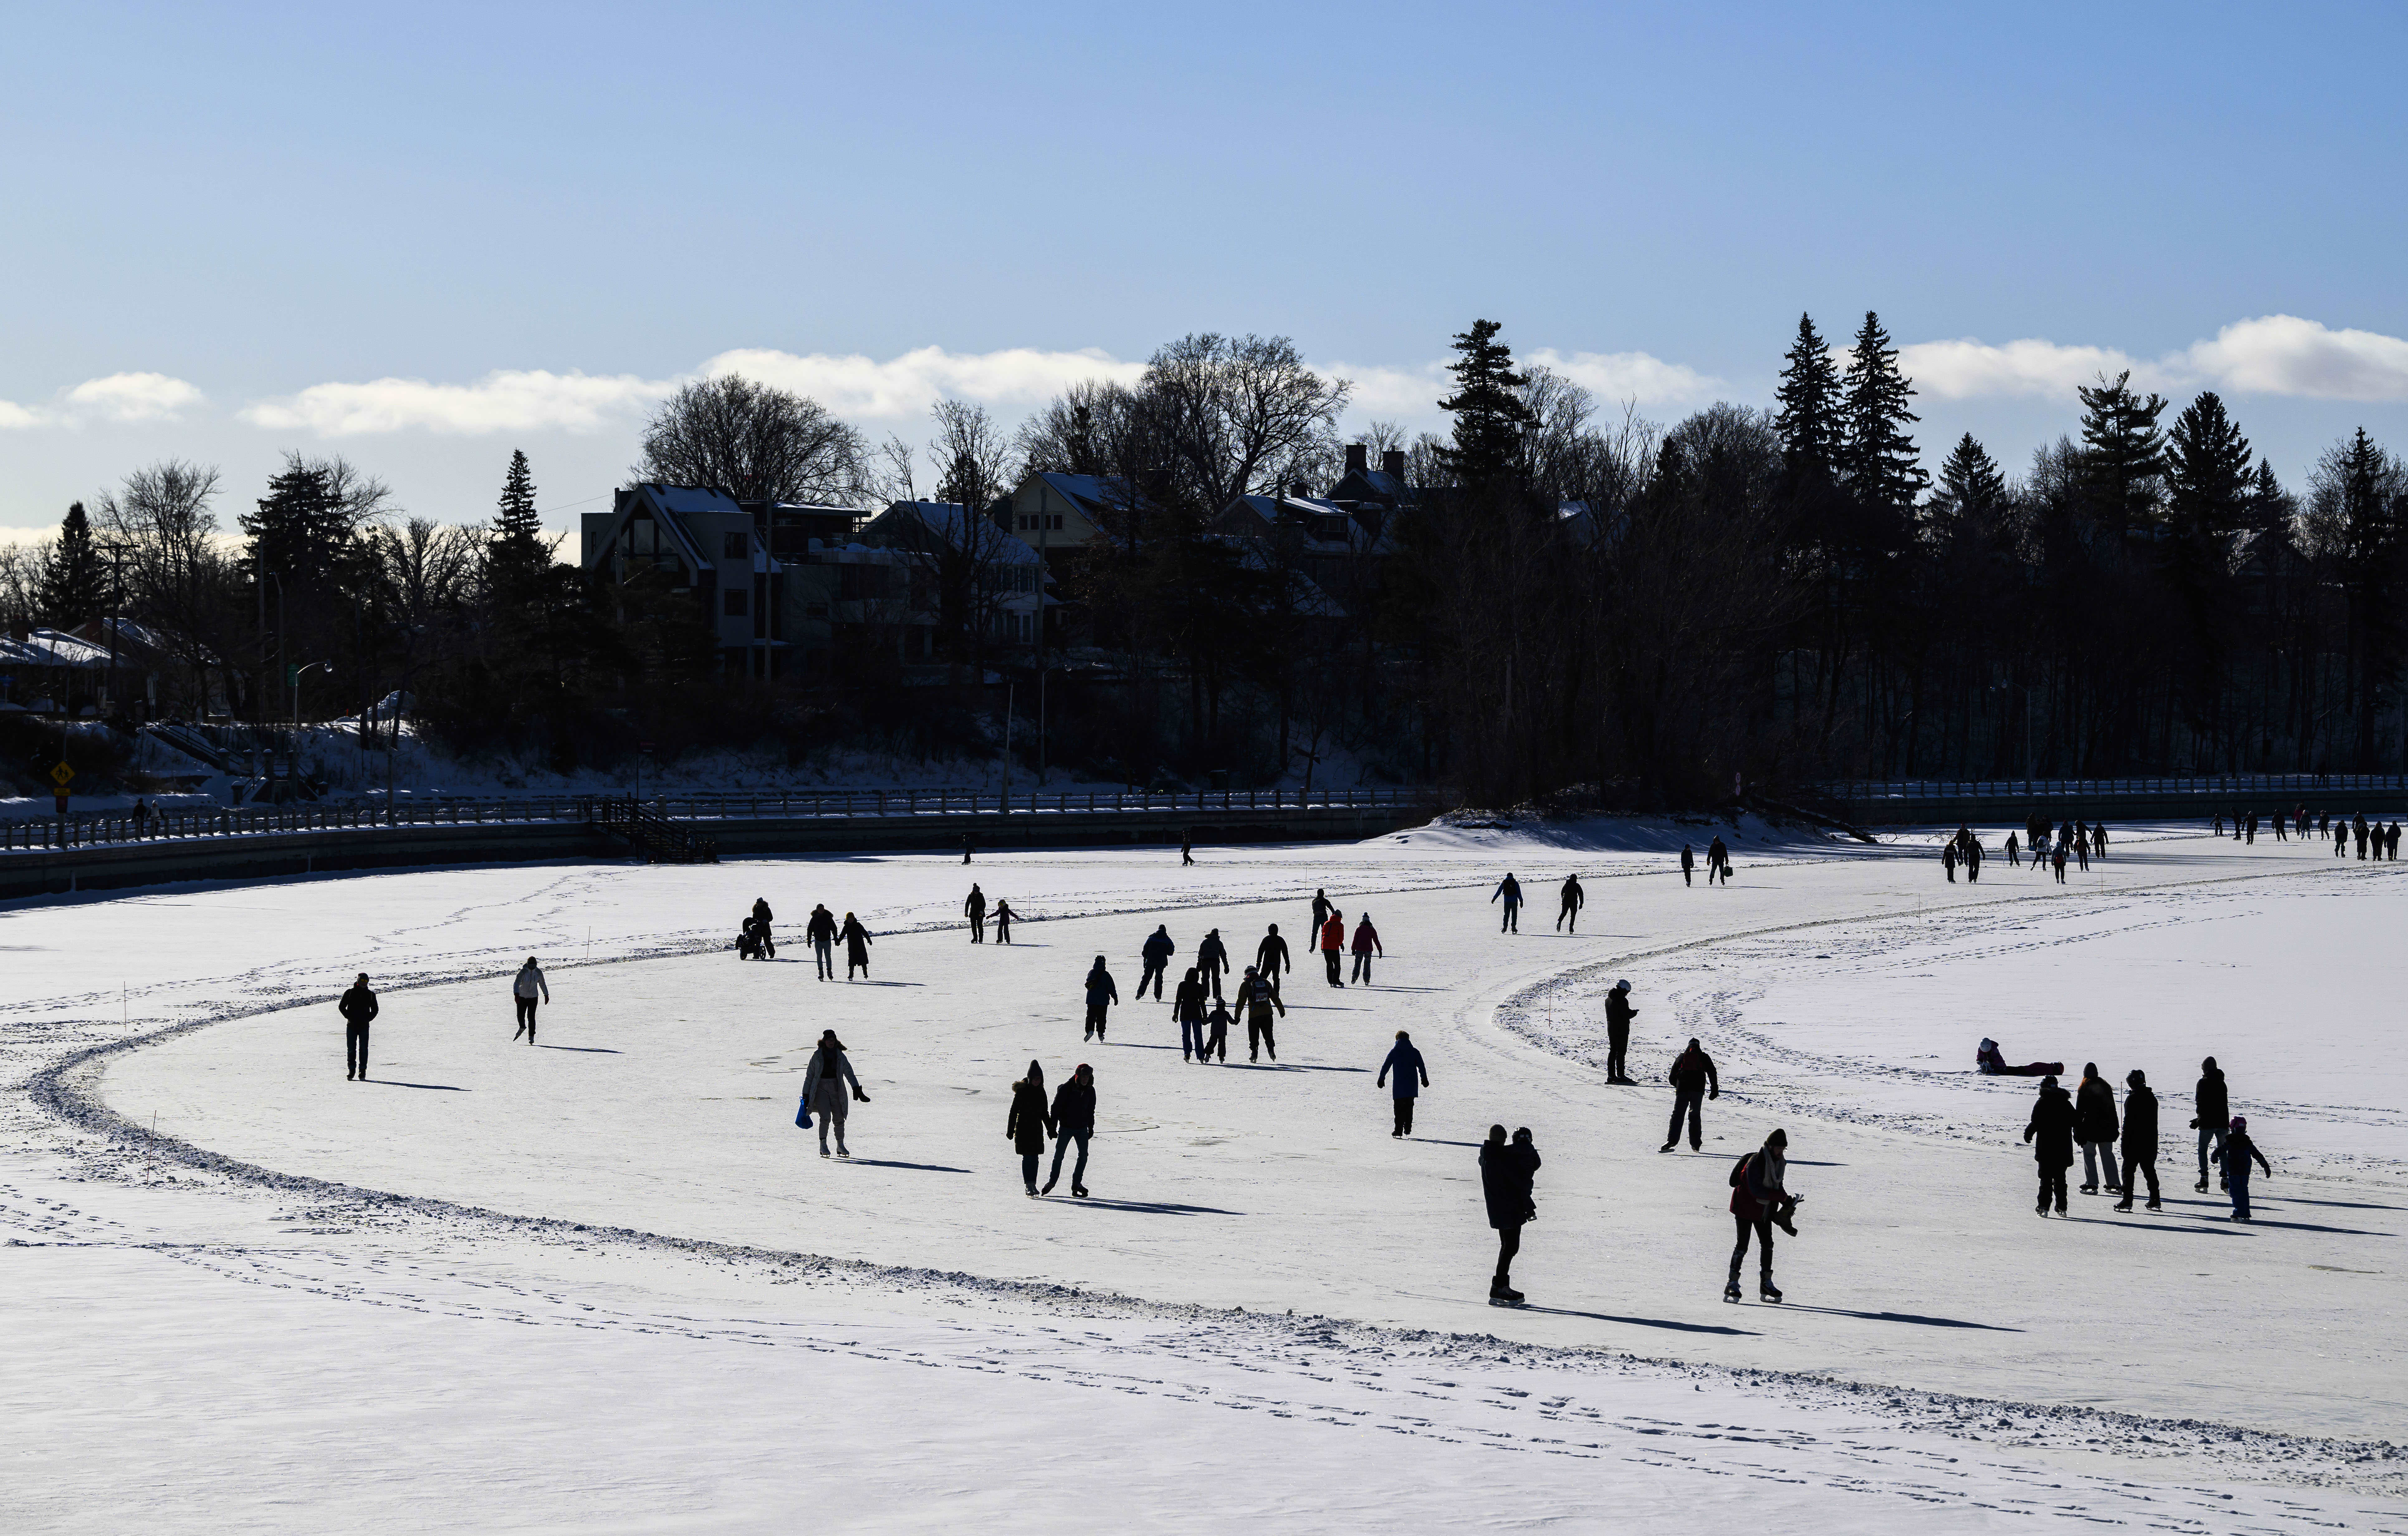 Ottawa’s Rideau Canal Skateway reopens after almost 2-year closure